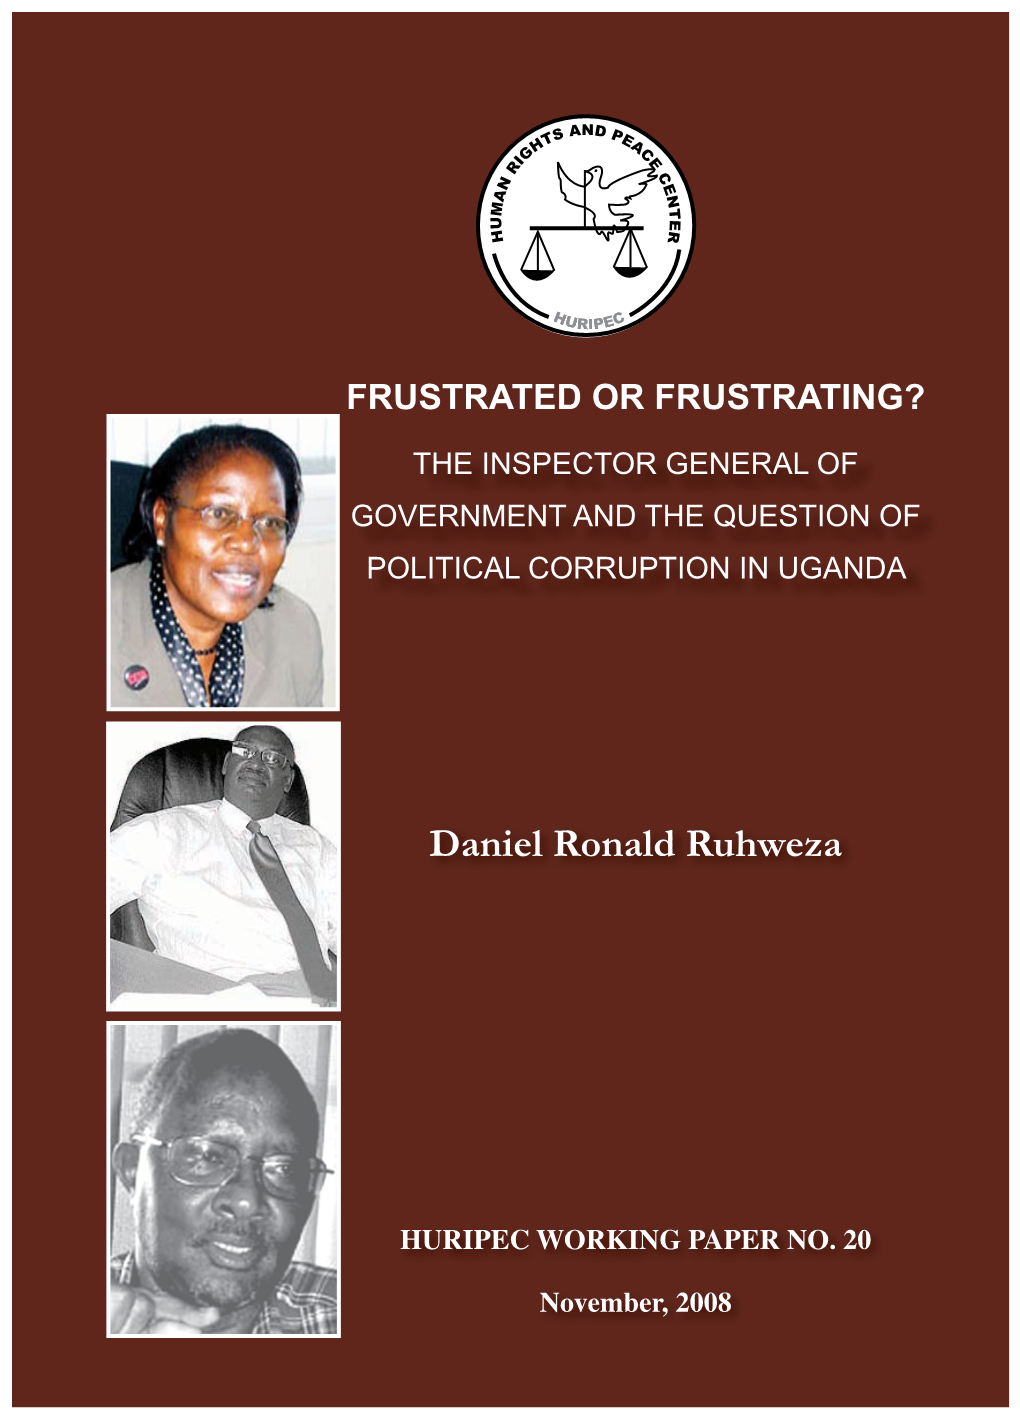 The Inspector General of Government and the Question of Political Corruption in Uganda